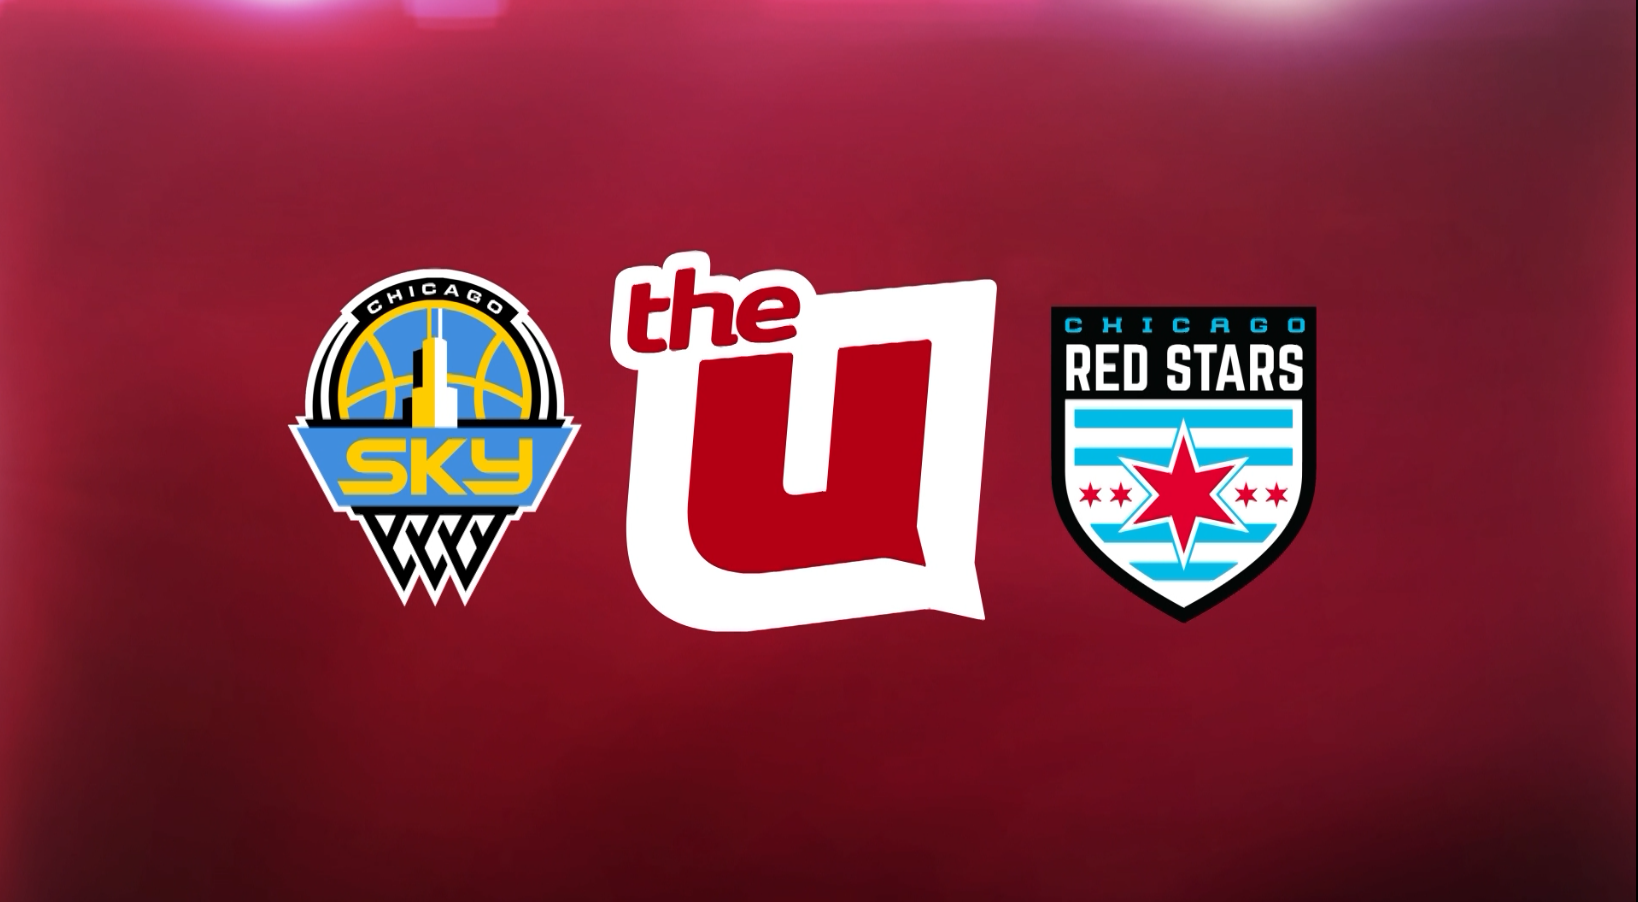 CW26 Watch The Chicago Sky and The Chicago Red Stars on CW26 and The U!